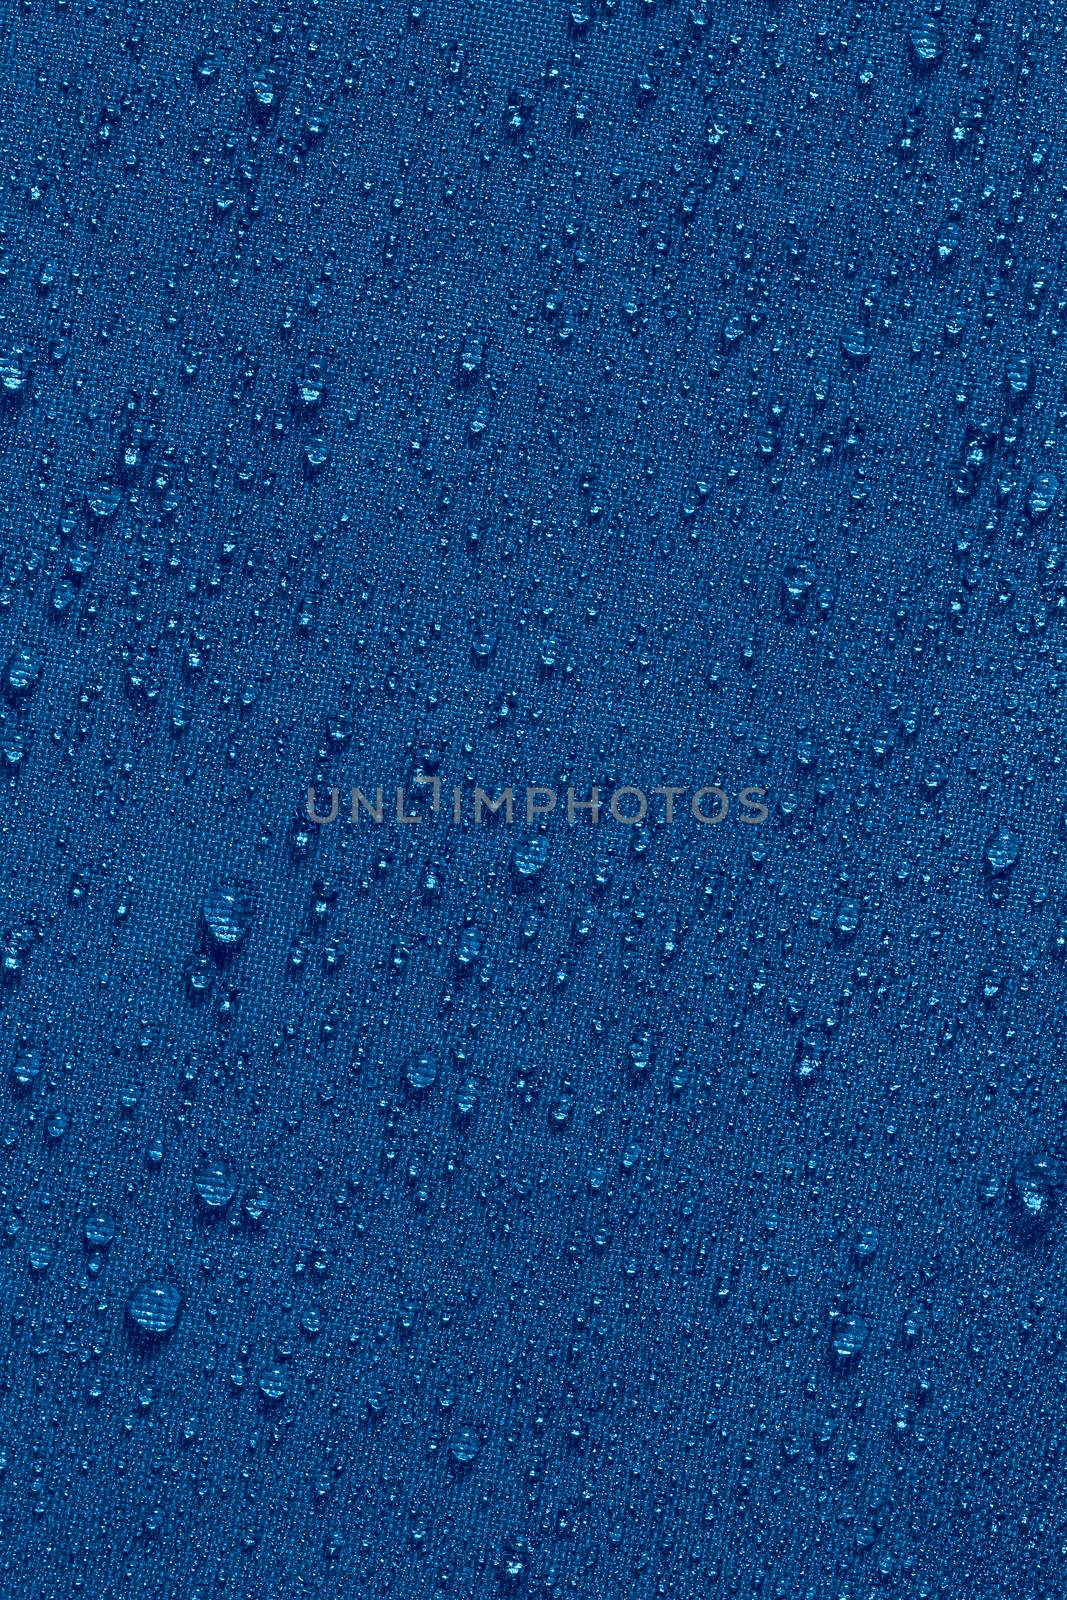 classic blue color waterproof hydrophobic flat cloth closeup with water drops background.